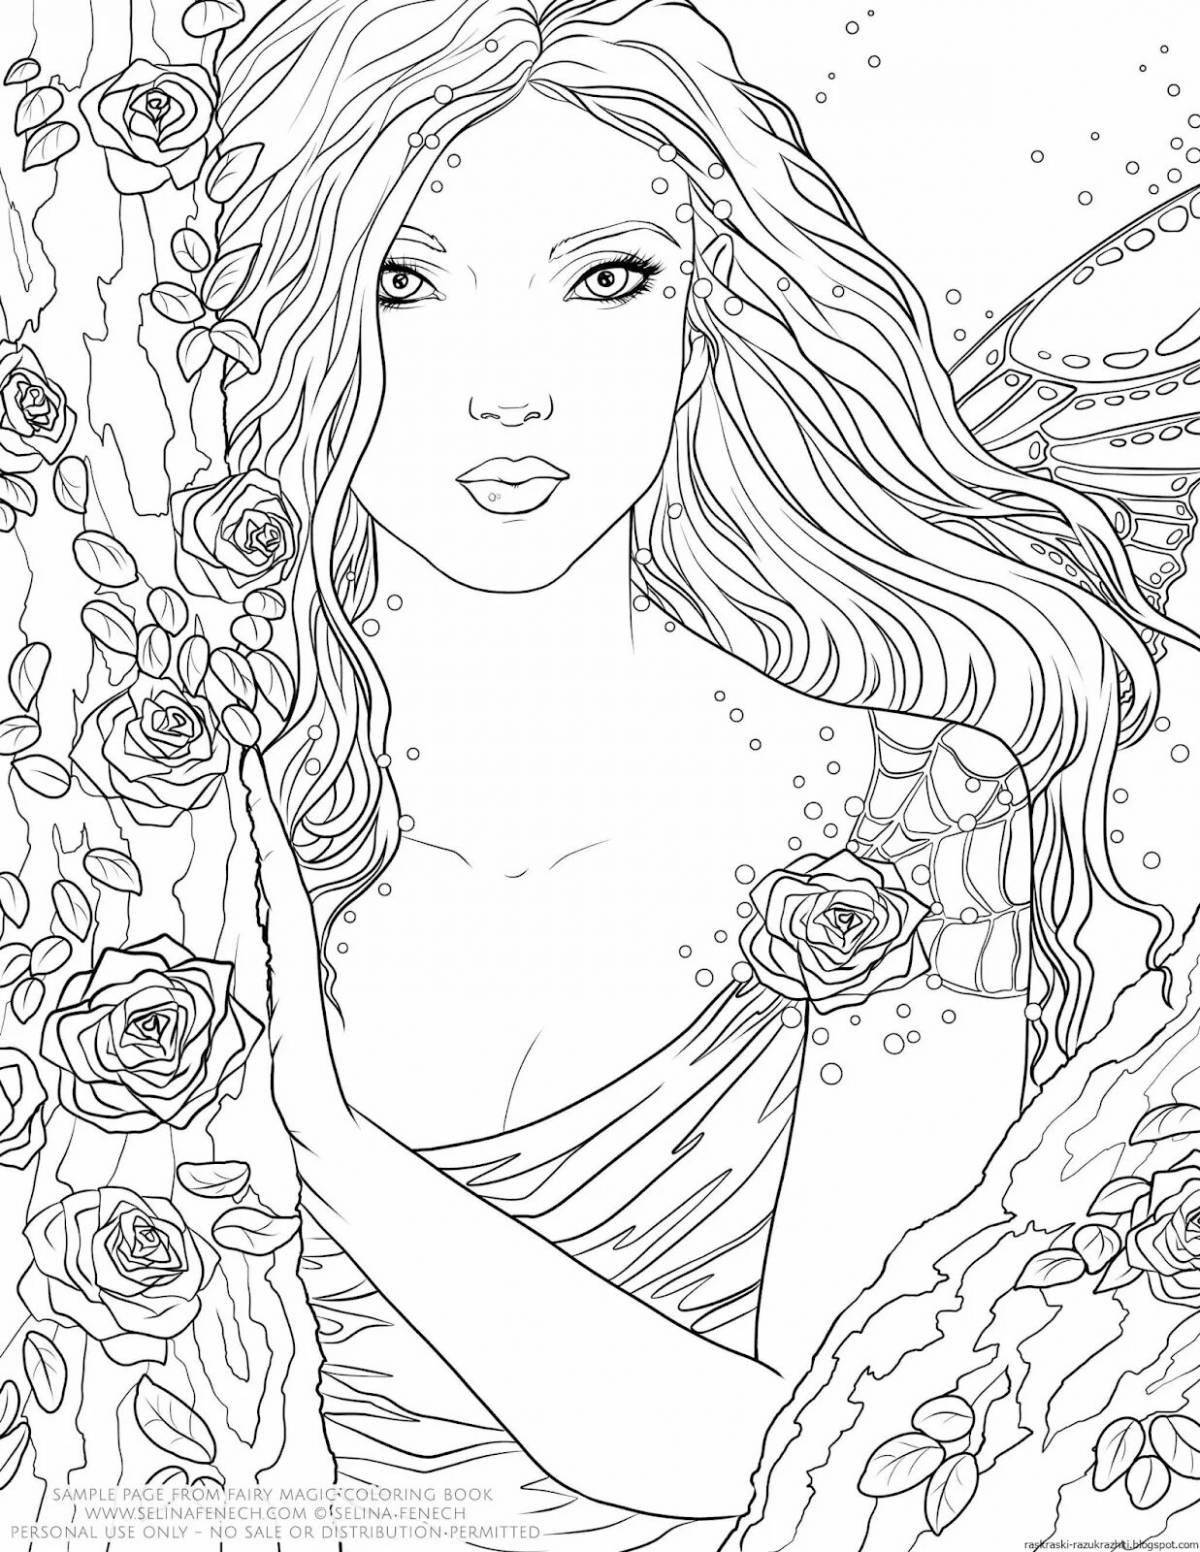 Exquisite modern coloring book for adults